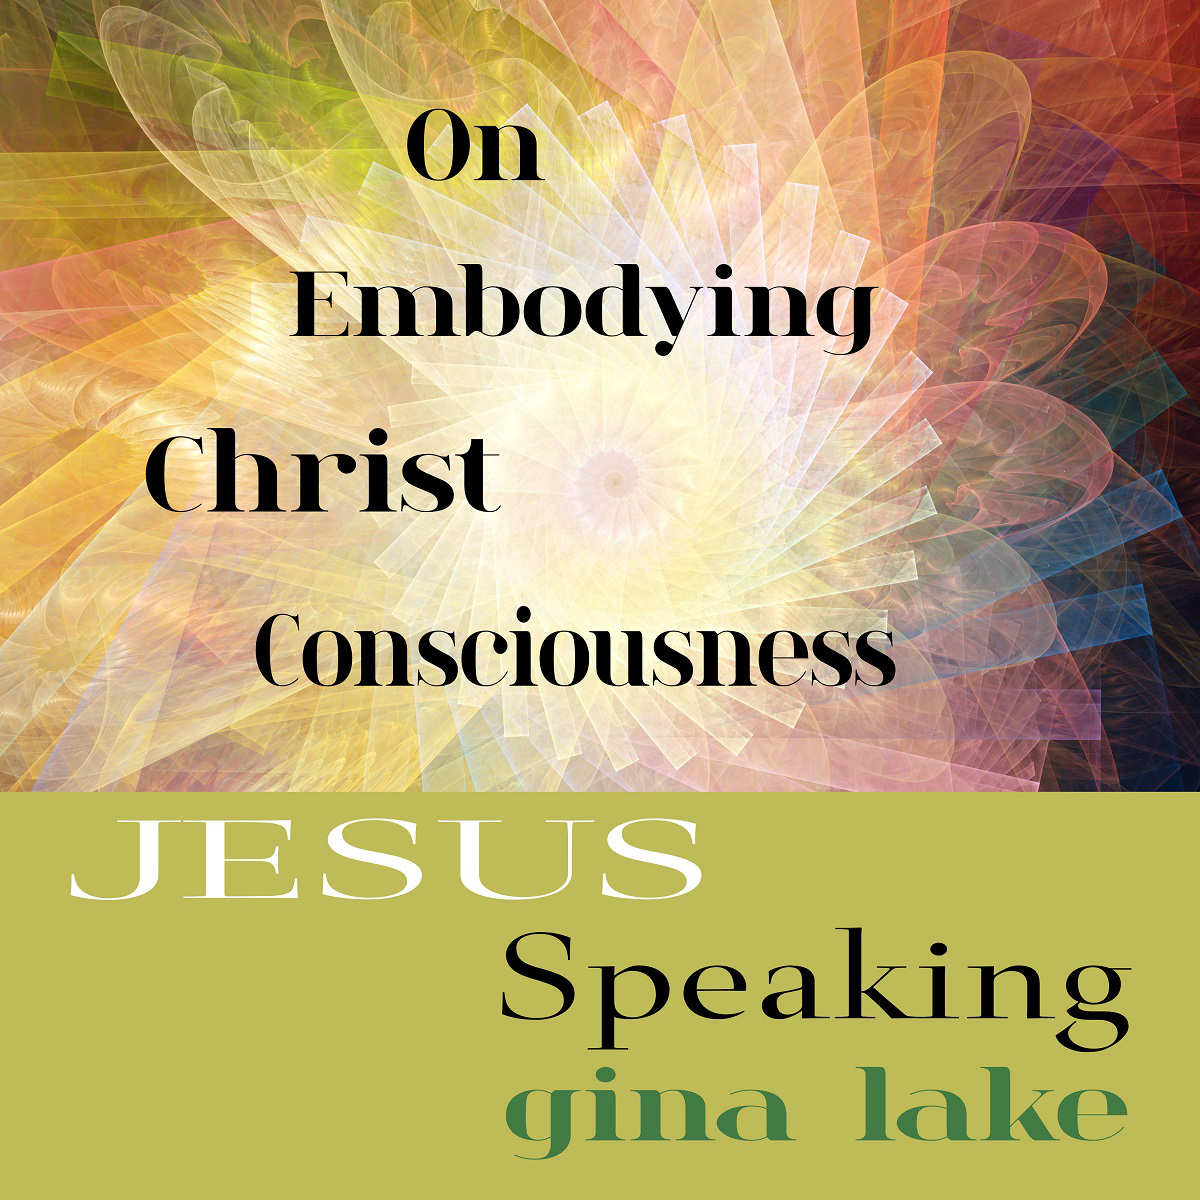 Jesus Speaking 4 on Embodying Christ Consciousness by Gina Lake